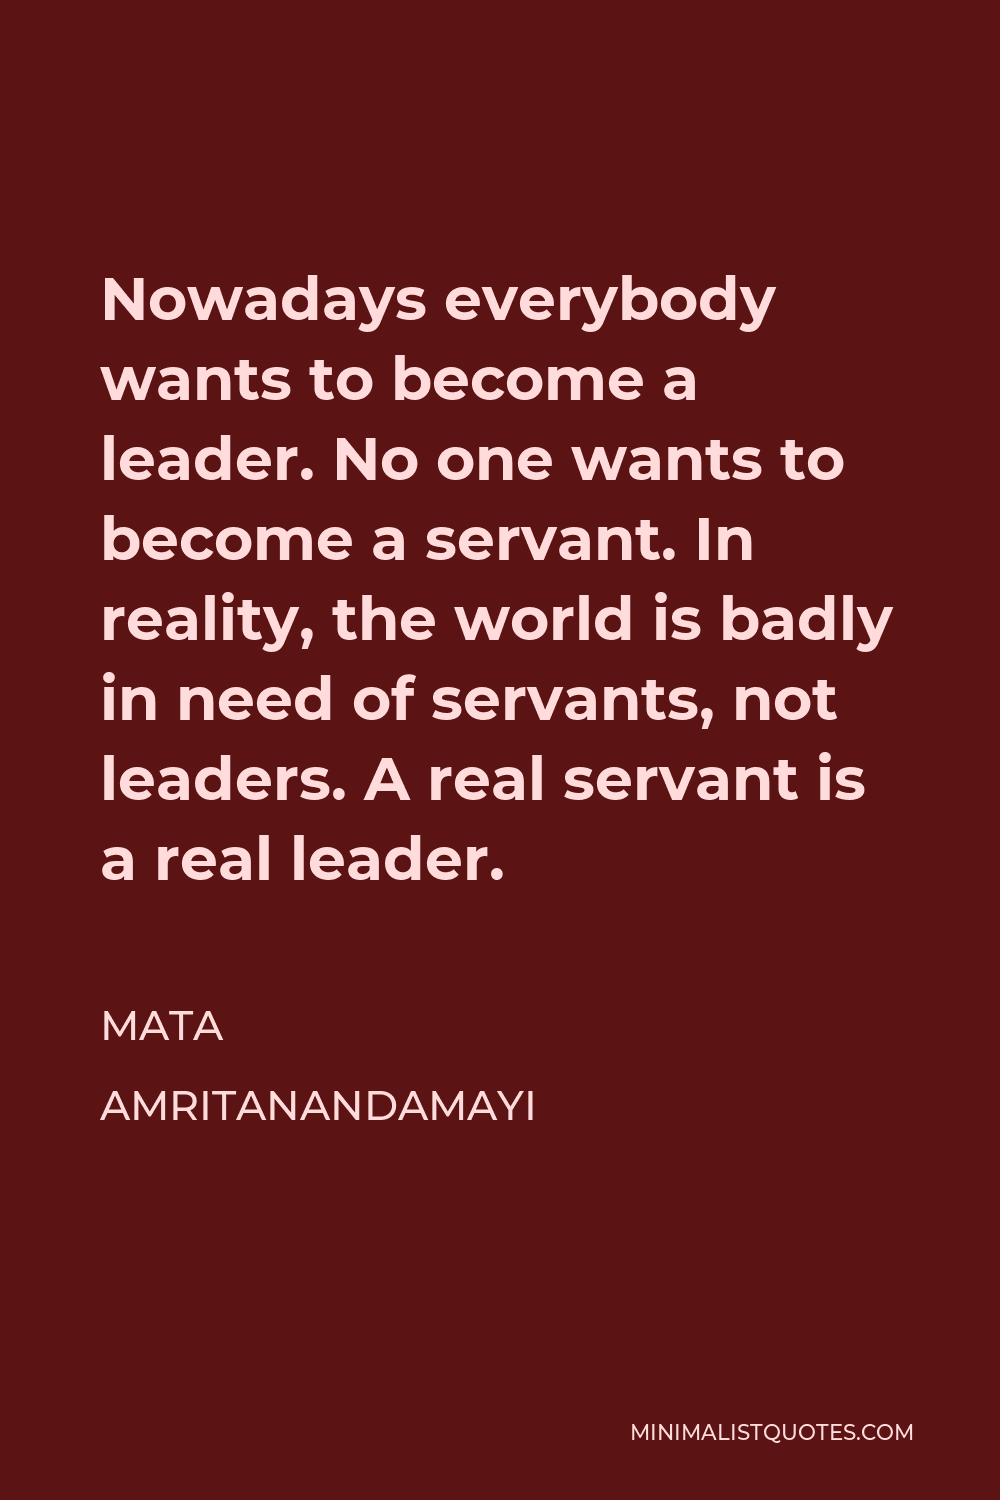 Mata Amritanandamayi Quote - Nowadays everybody wants to become a leader. No one wants to become a servant. In reality, the world is badly in need of servants, not leaders. A real servant is a real leader.